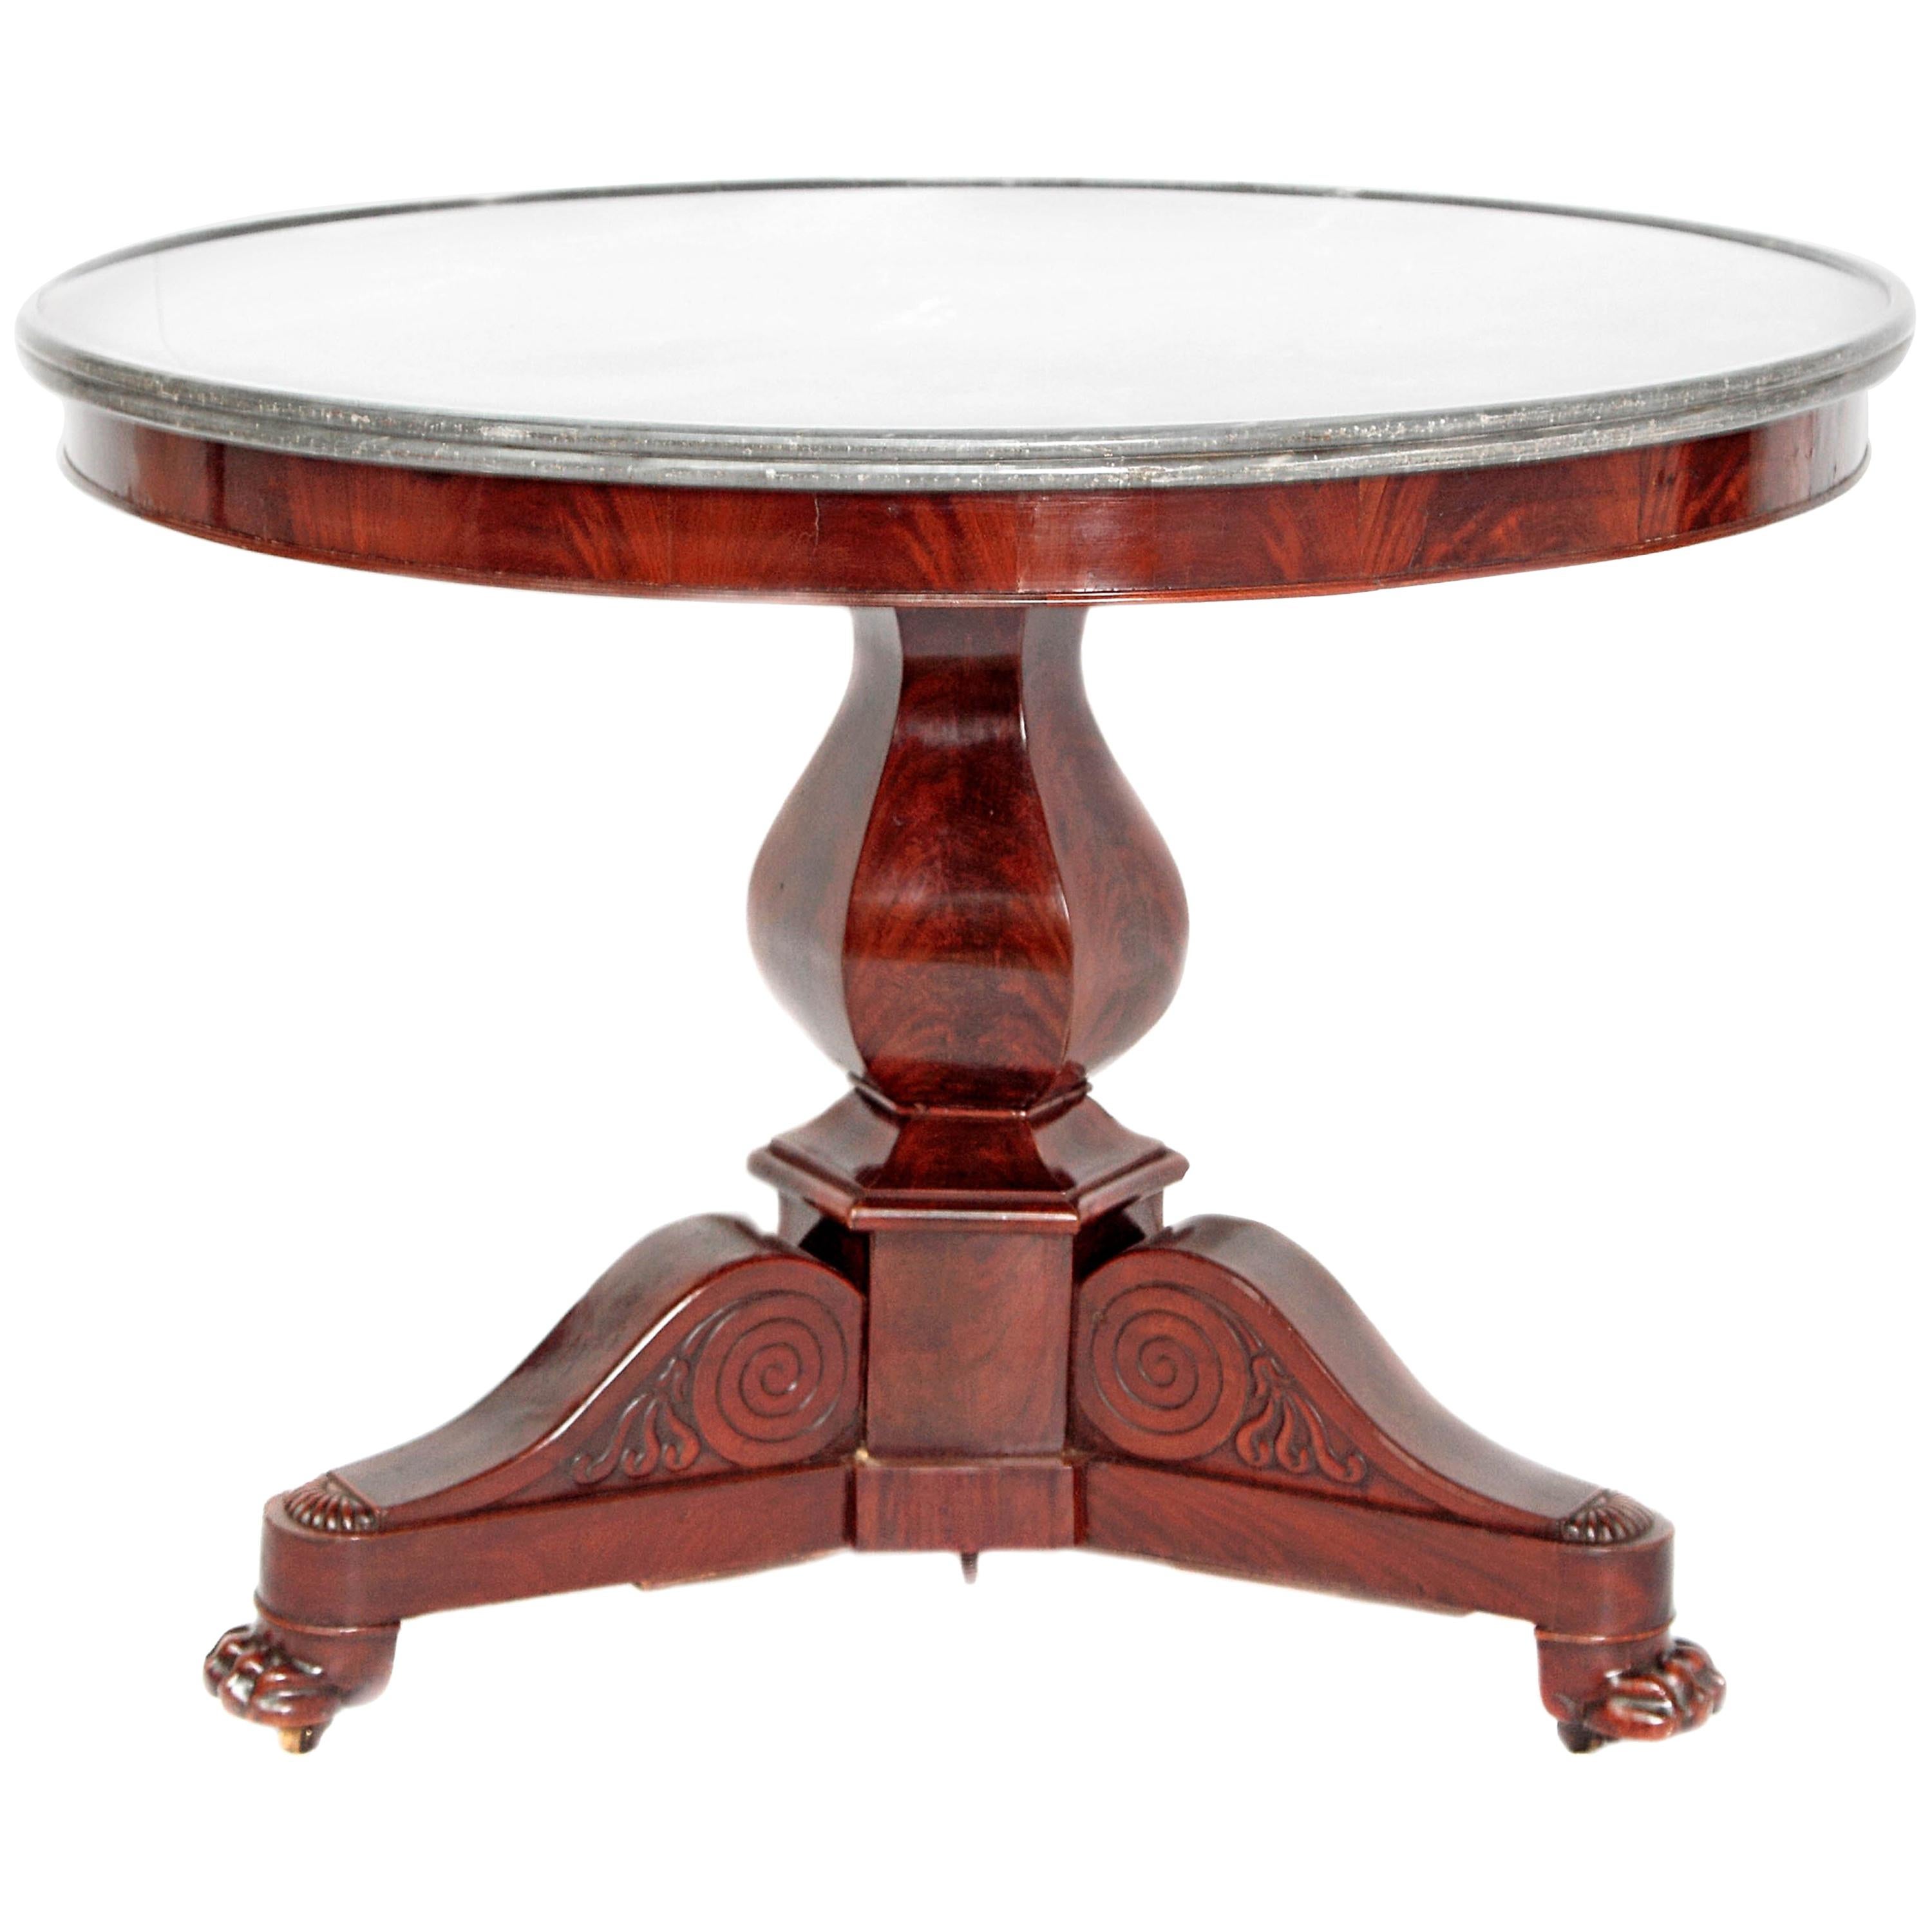 Mid-19th Century Charles X Walnut Center Table with Grey Marble Top